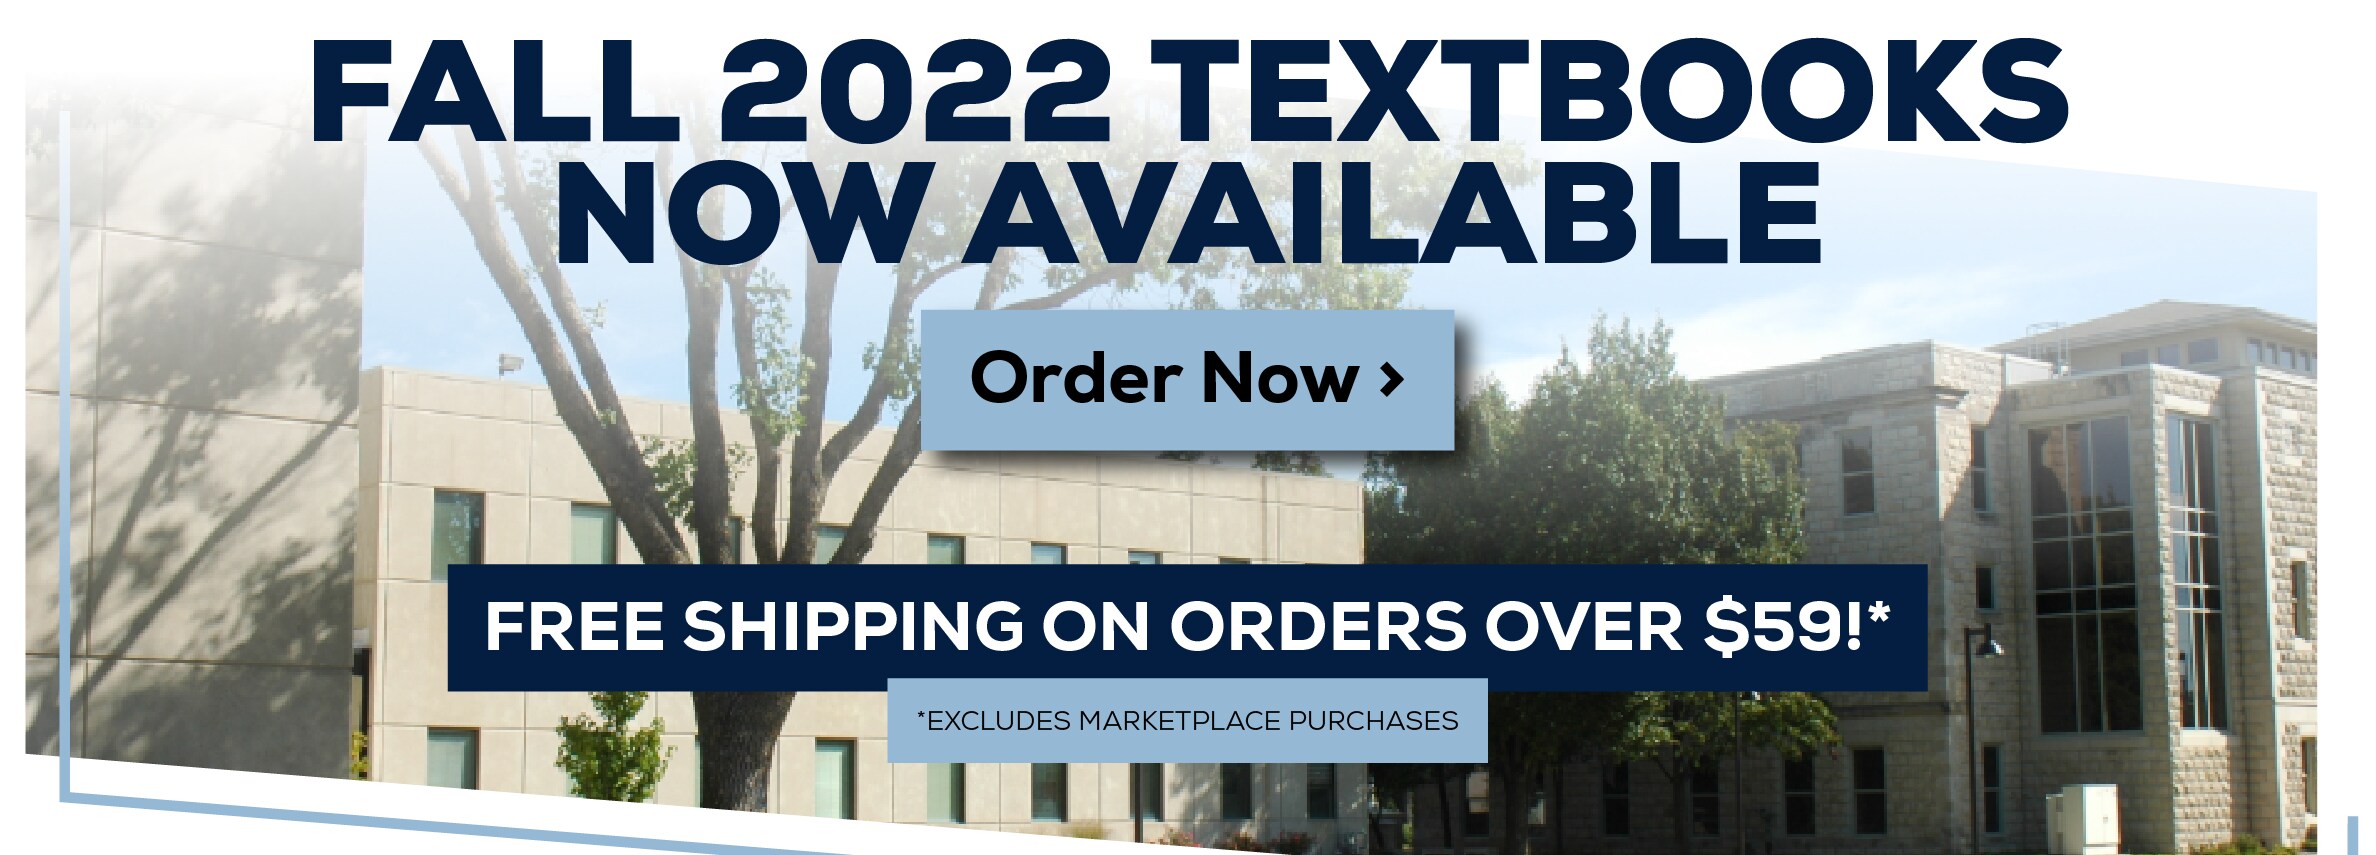 Fall 2022 Textbooks Now Available. Order Now. Free shipping on orders over $59!* *Excludes marketplace purchases.